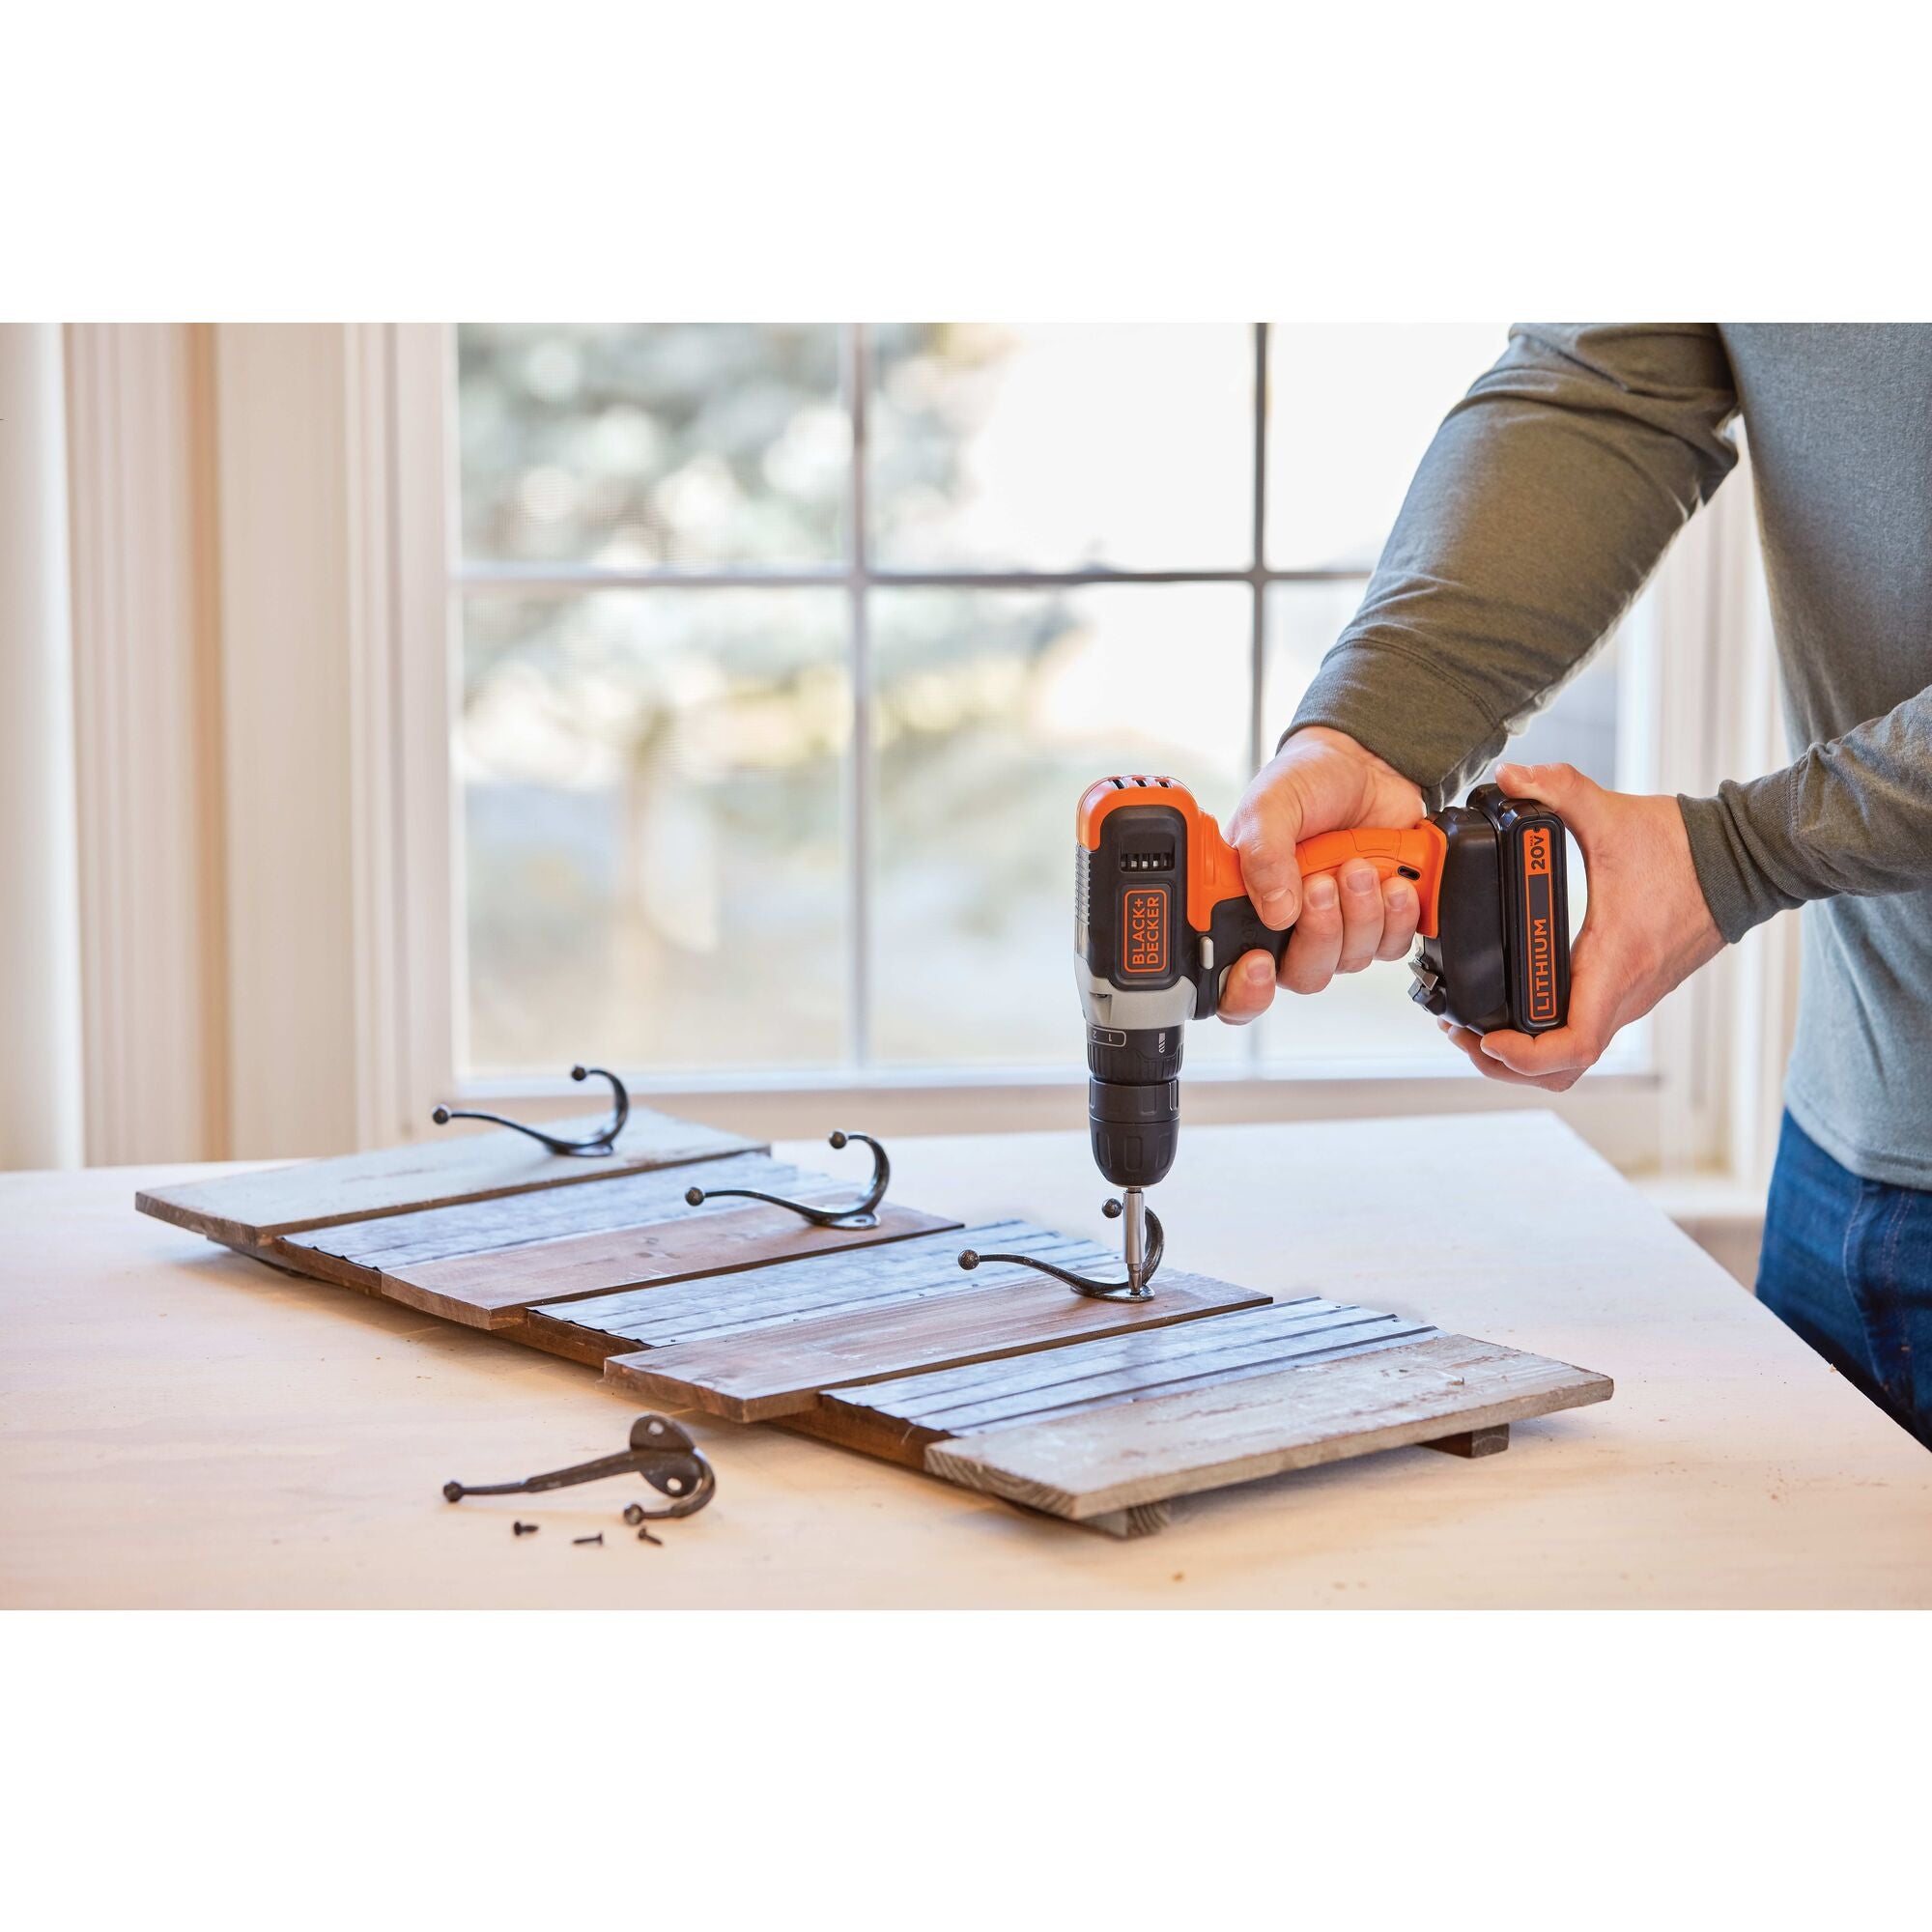 Black & Decker 20V Max Drill & Home Tool Kit Review: Jack-of-All